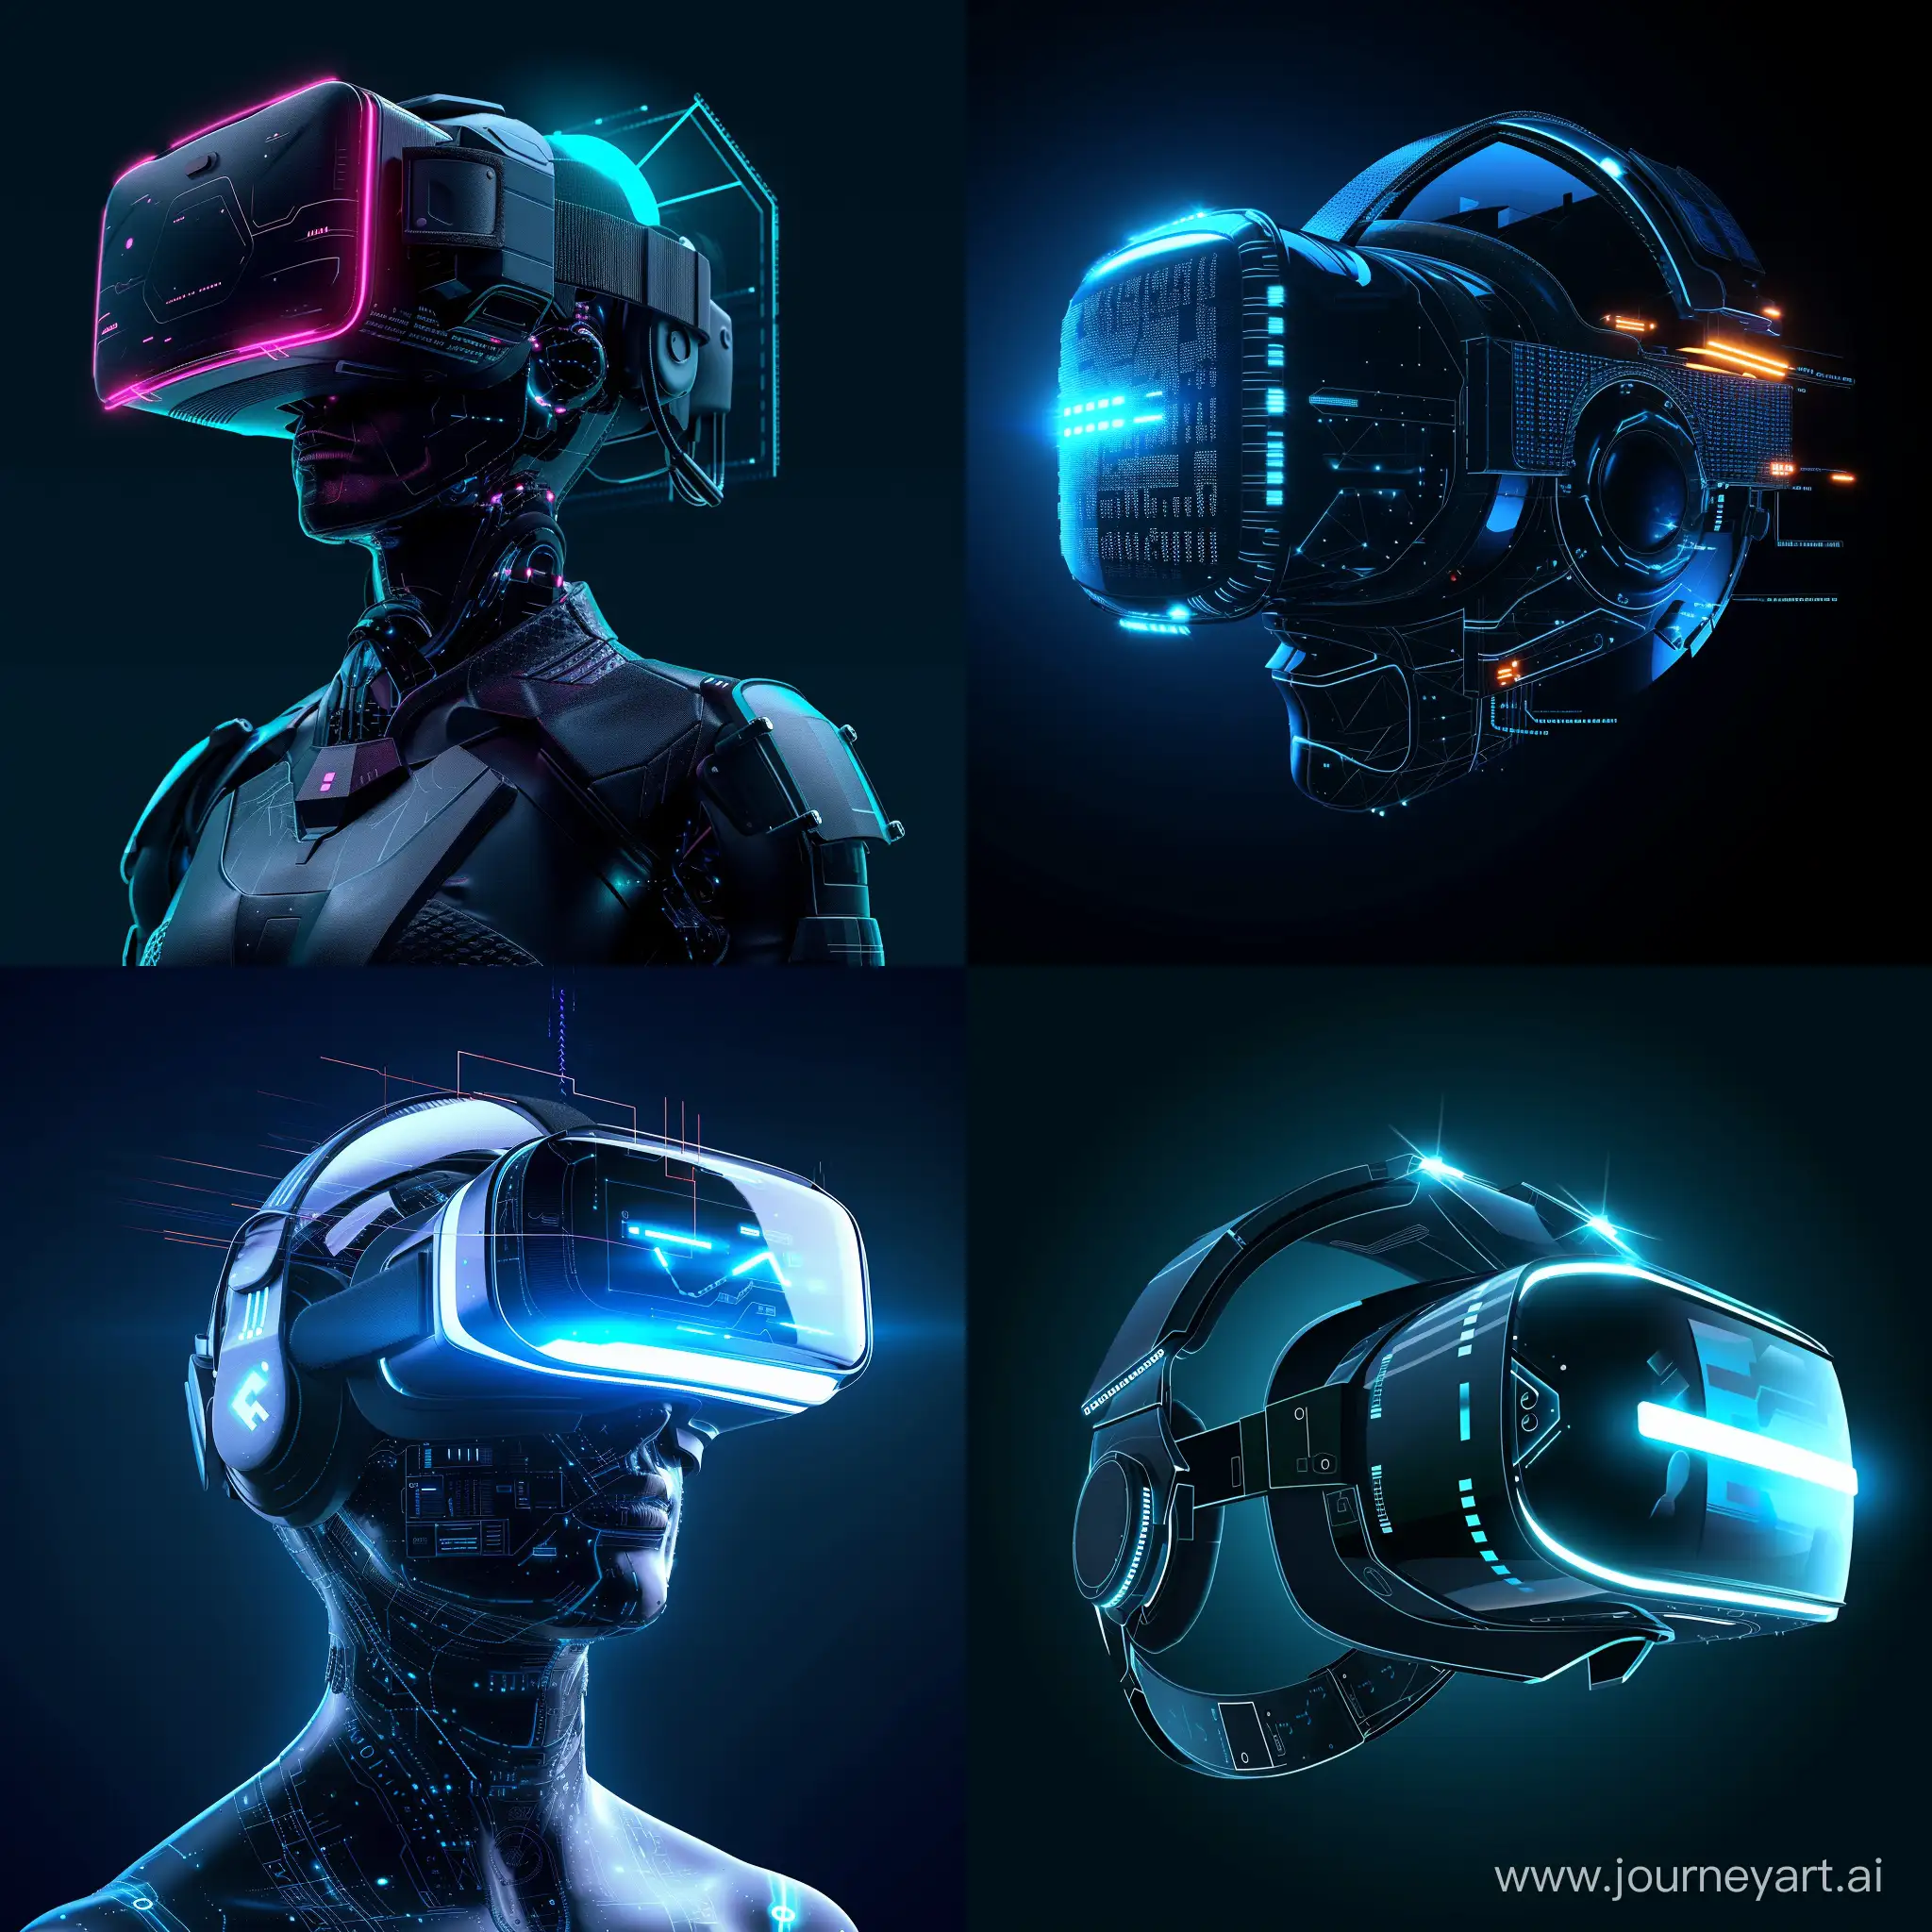 Futuristic VR headset, strong artificial intelligence technology, in cinematic futuristic style